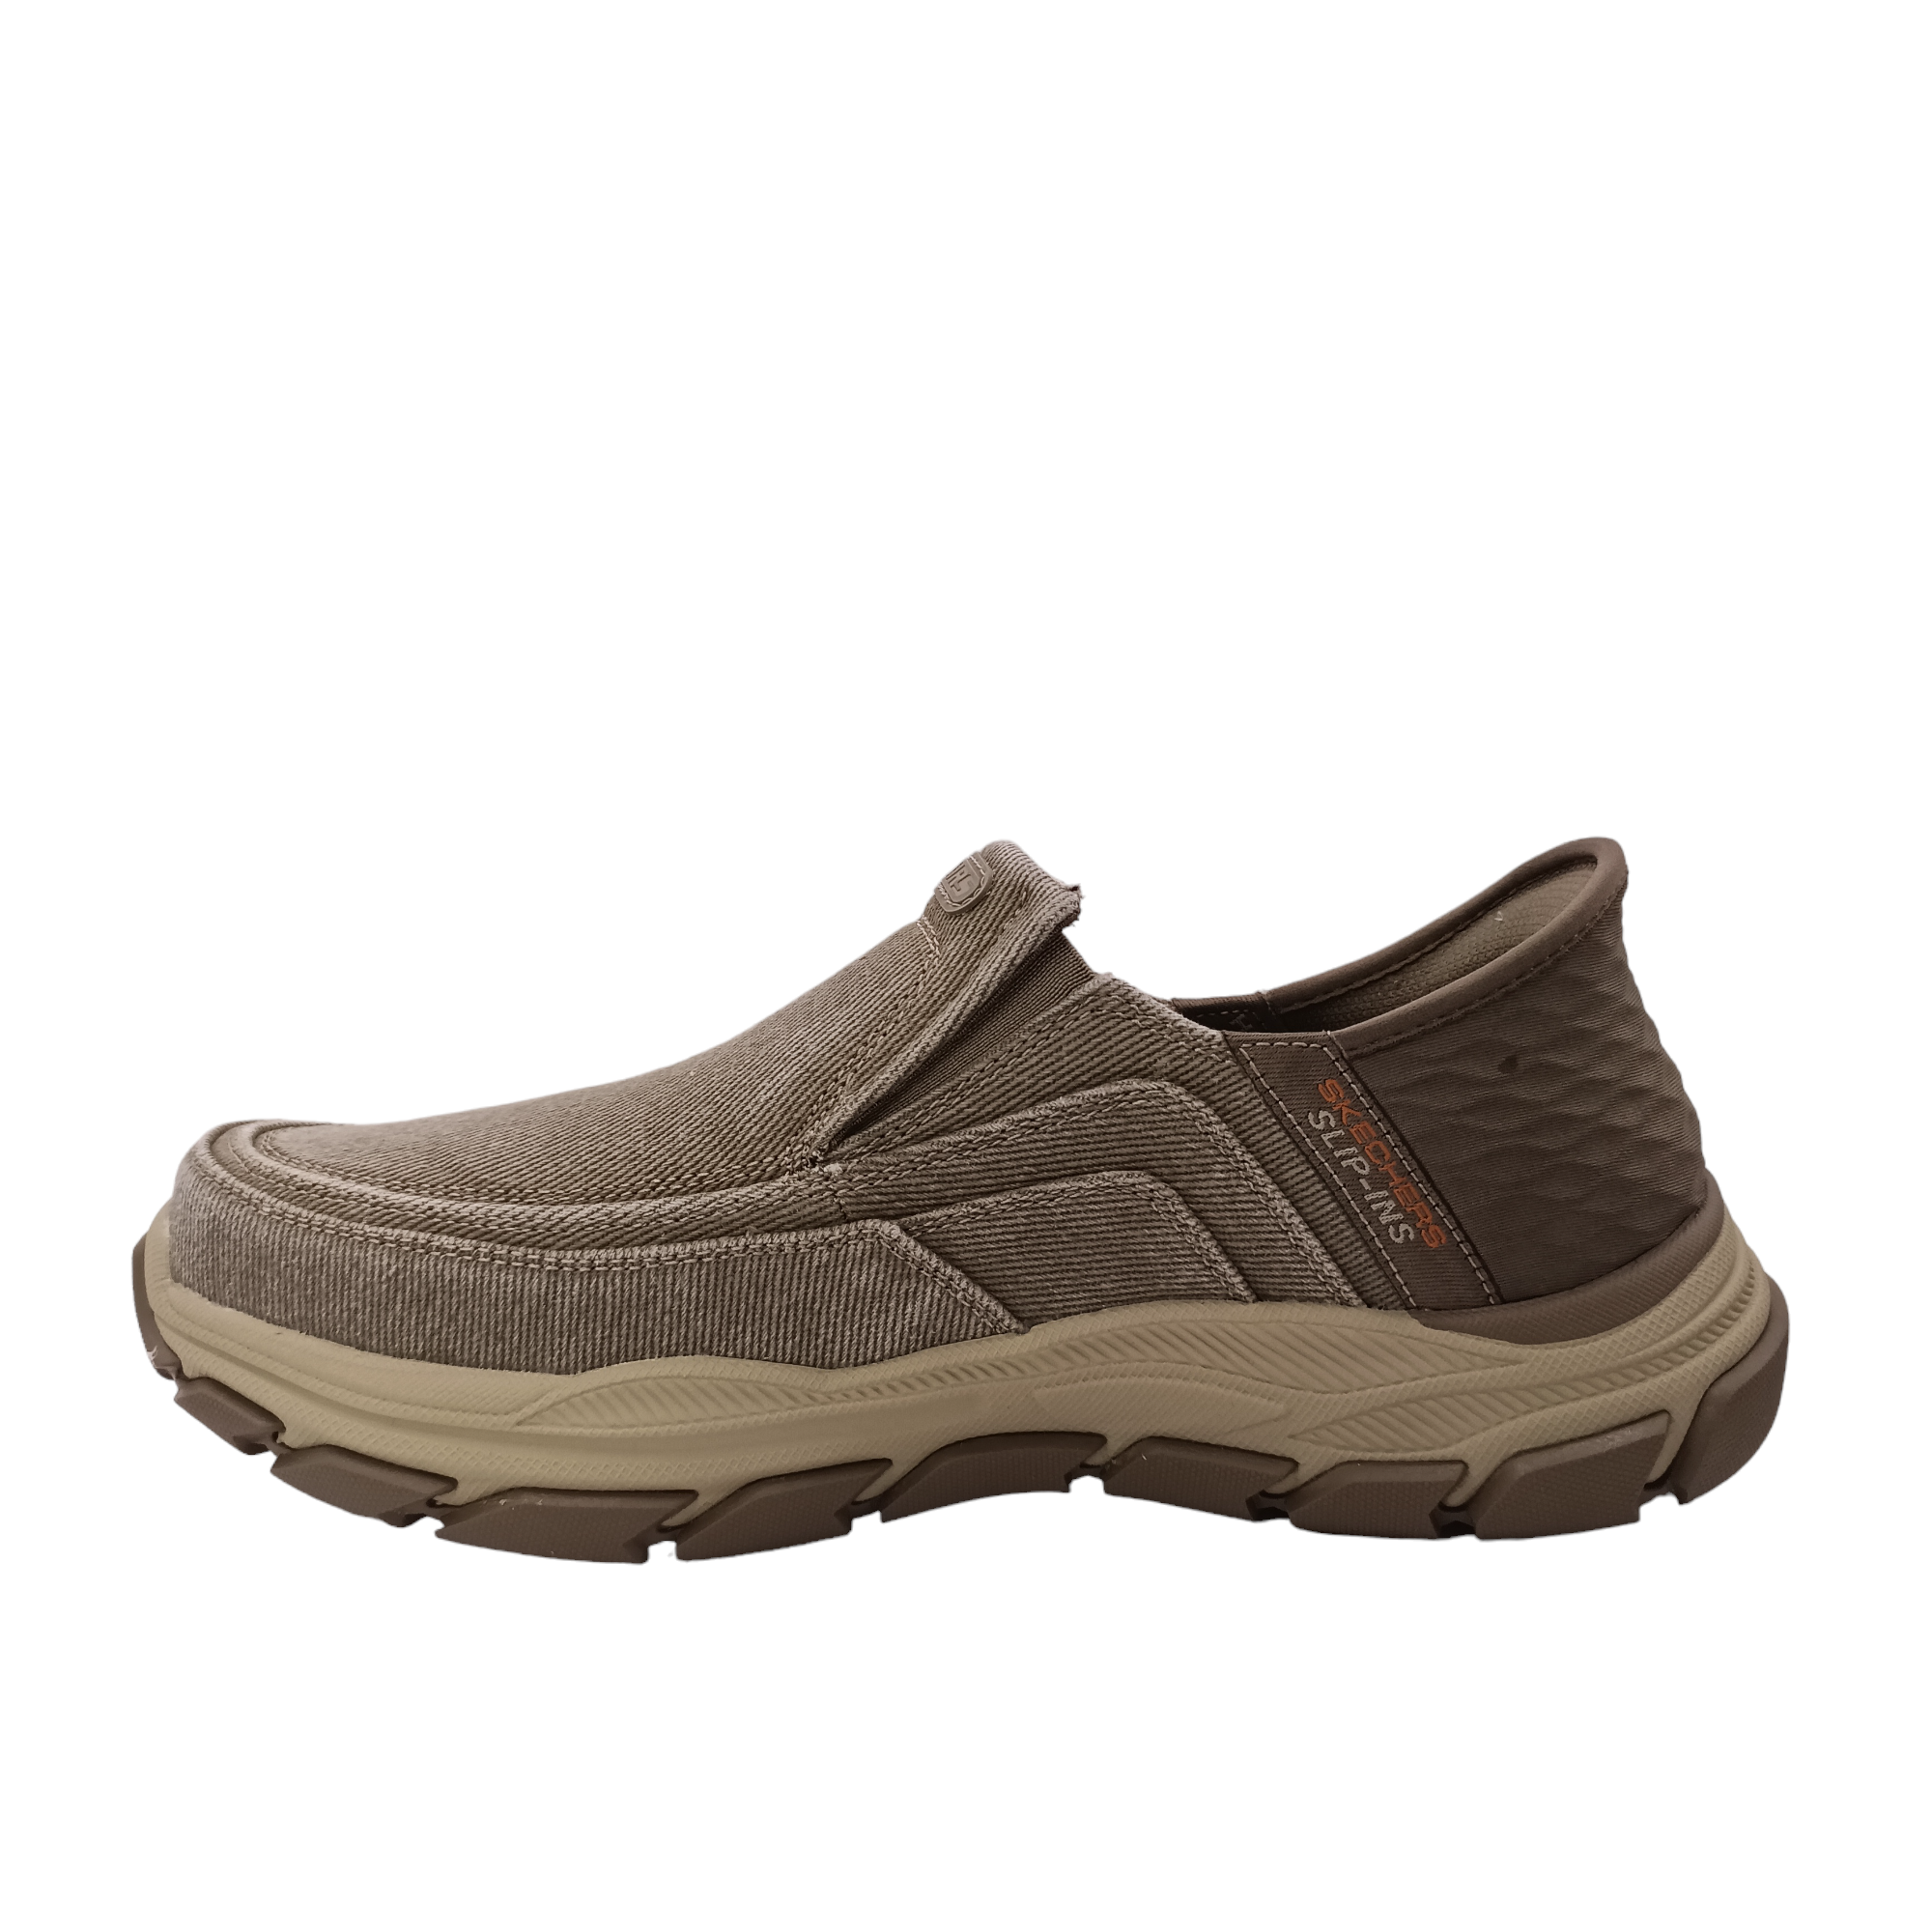 Holmgren from Skechers. Inner side view of shoe with slip-in technology on the heel, a firm and cushioned heel for easy entry without hands. Rugged looked sole with a synthetic upper with visible stitching. Wide fitting with two small external gussets. Shop Online and in-store with shoe&me Mount Maunganui Tauranga